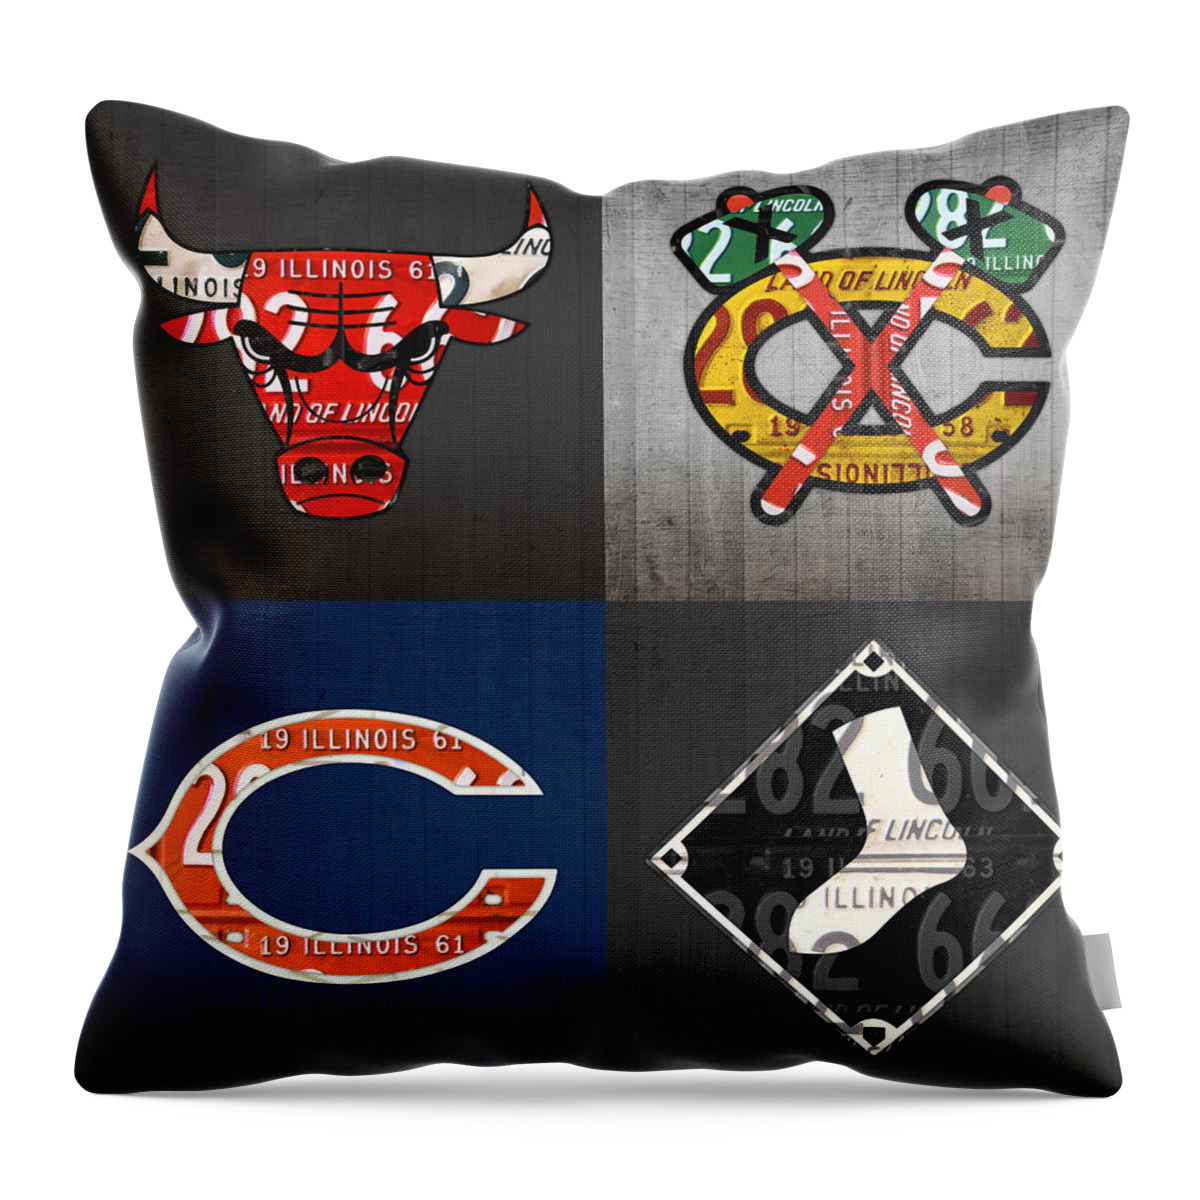 Chicago Throw Pillow featuring the mixed media Chicago Sports Fan Recycled Vintage Illinois License Plate Art Bulls Blackhawks Bears and White Sox by Design Turnpike